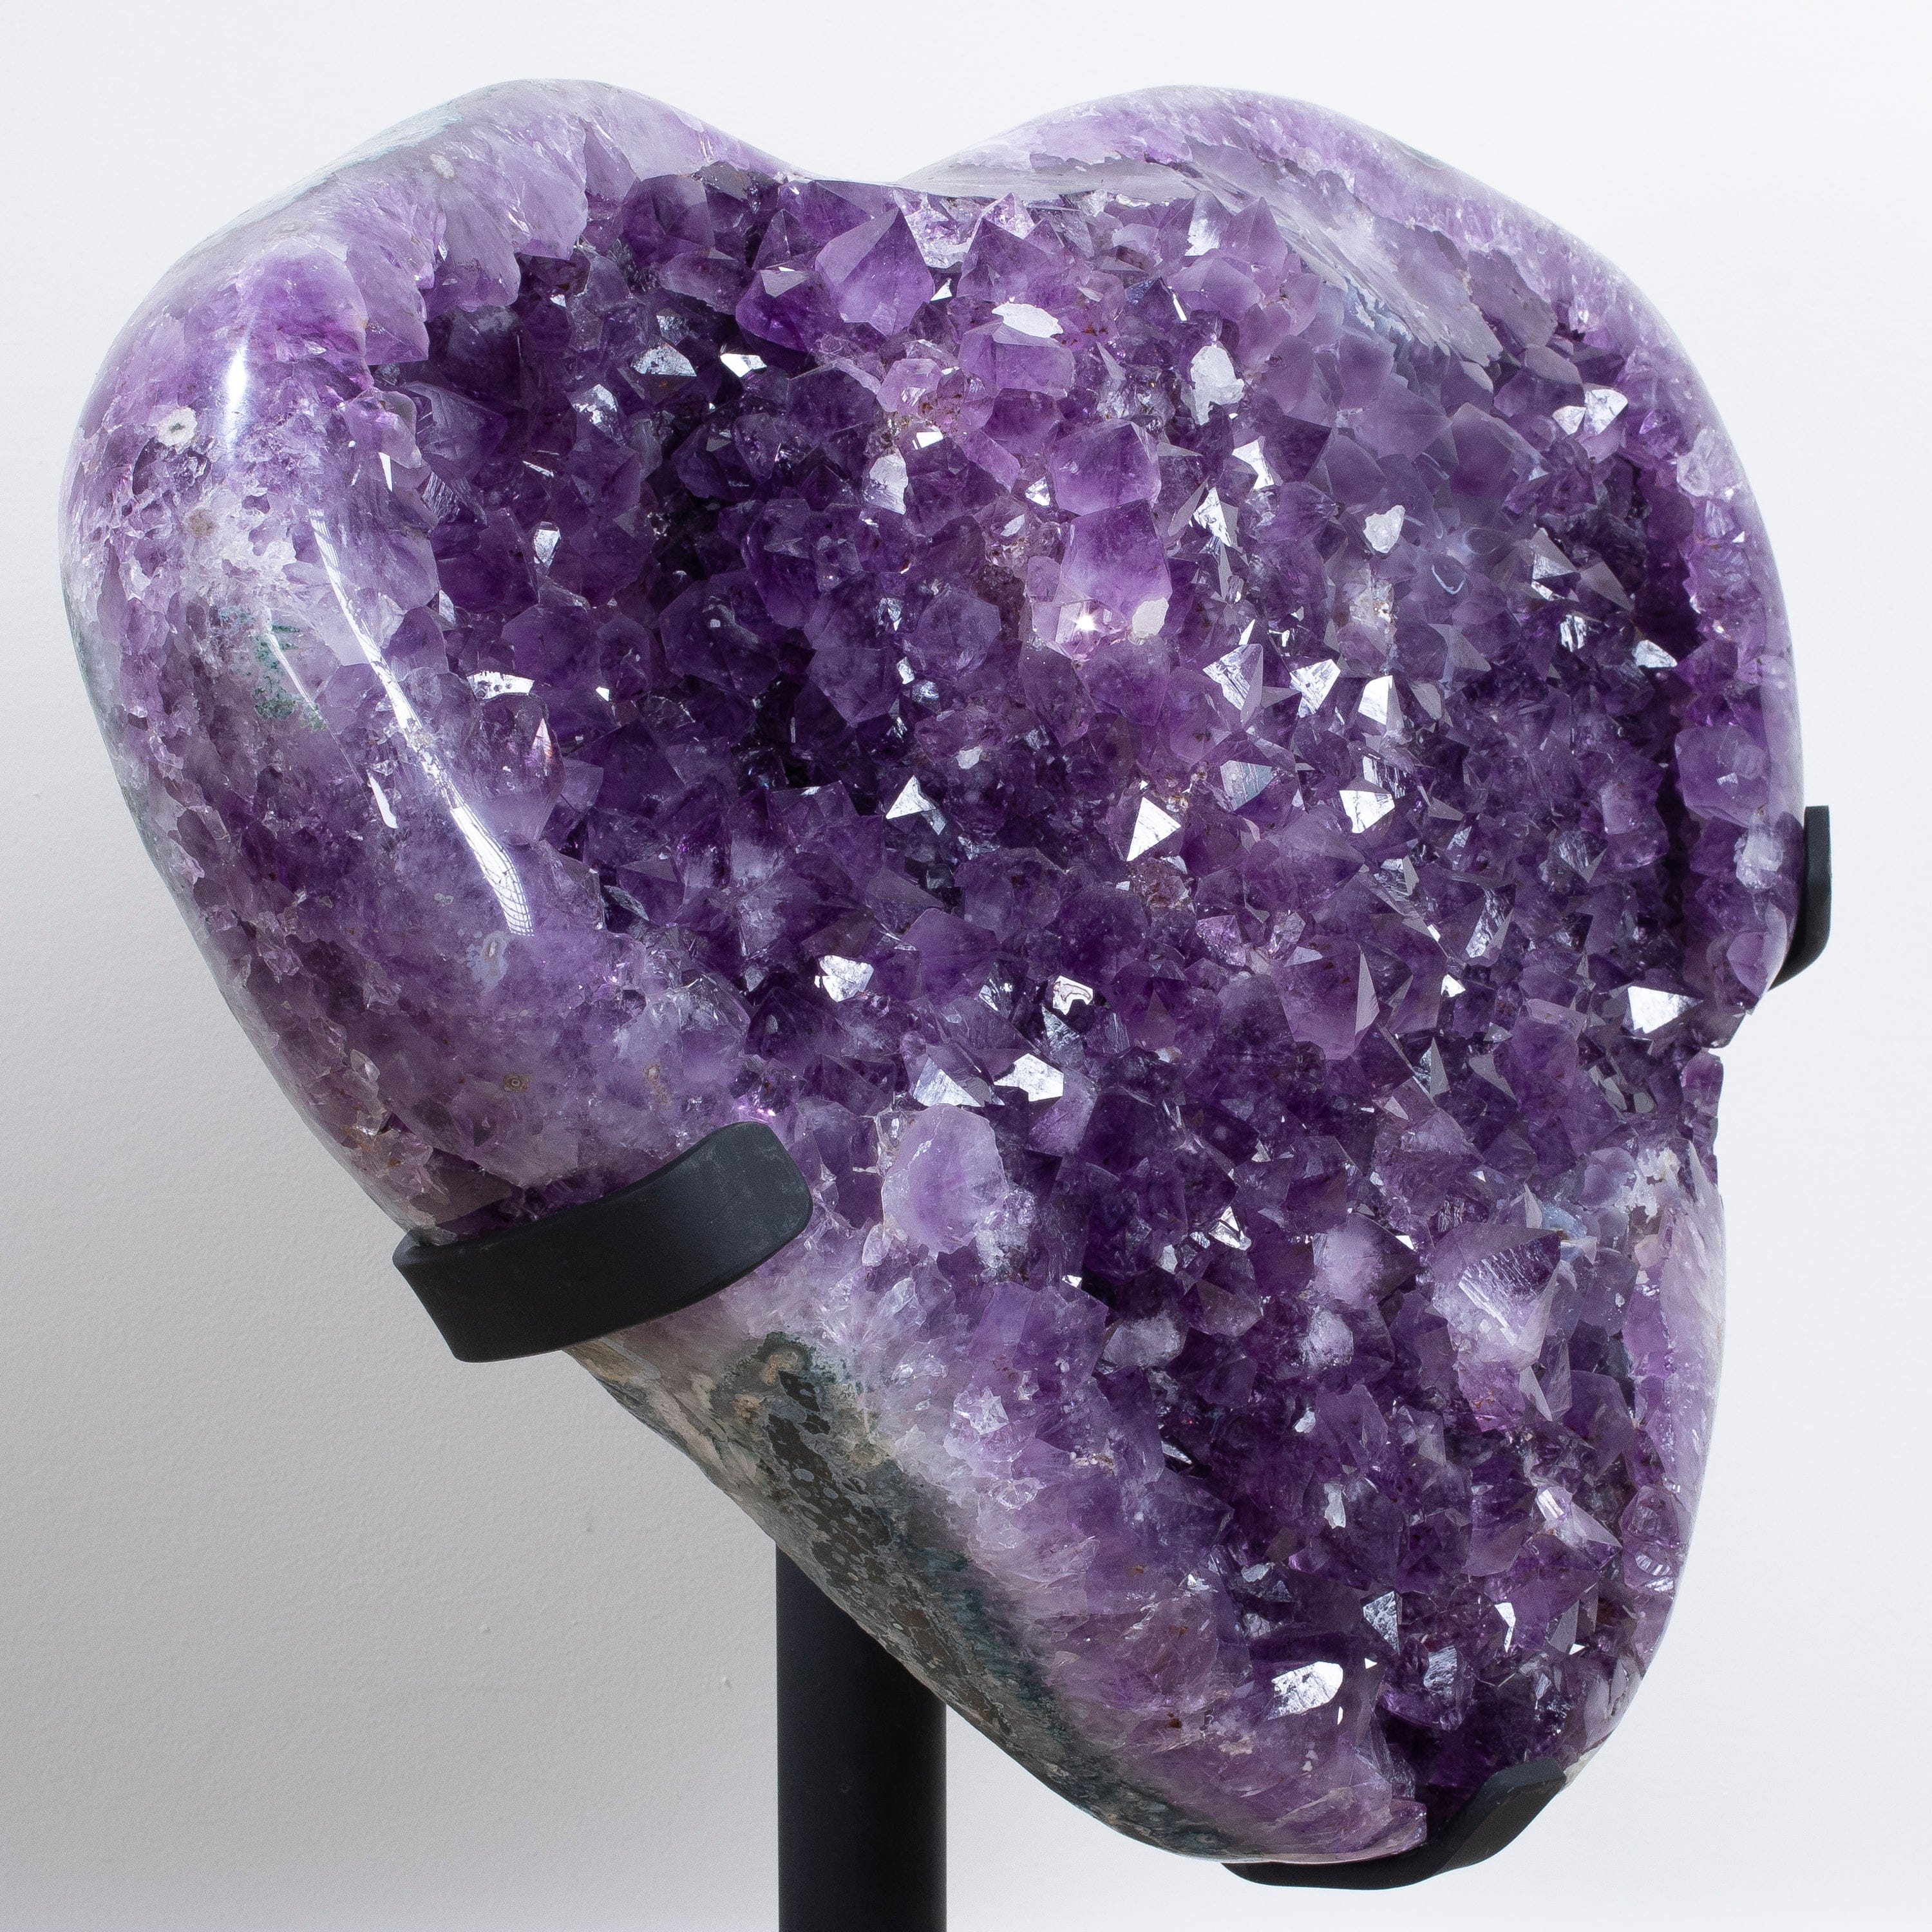 Kalifano Amethyst Amethyst Geode Heart Carving from Brazil on Custom Stand - 27" / 58 lbs BAG16000.010